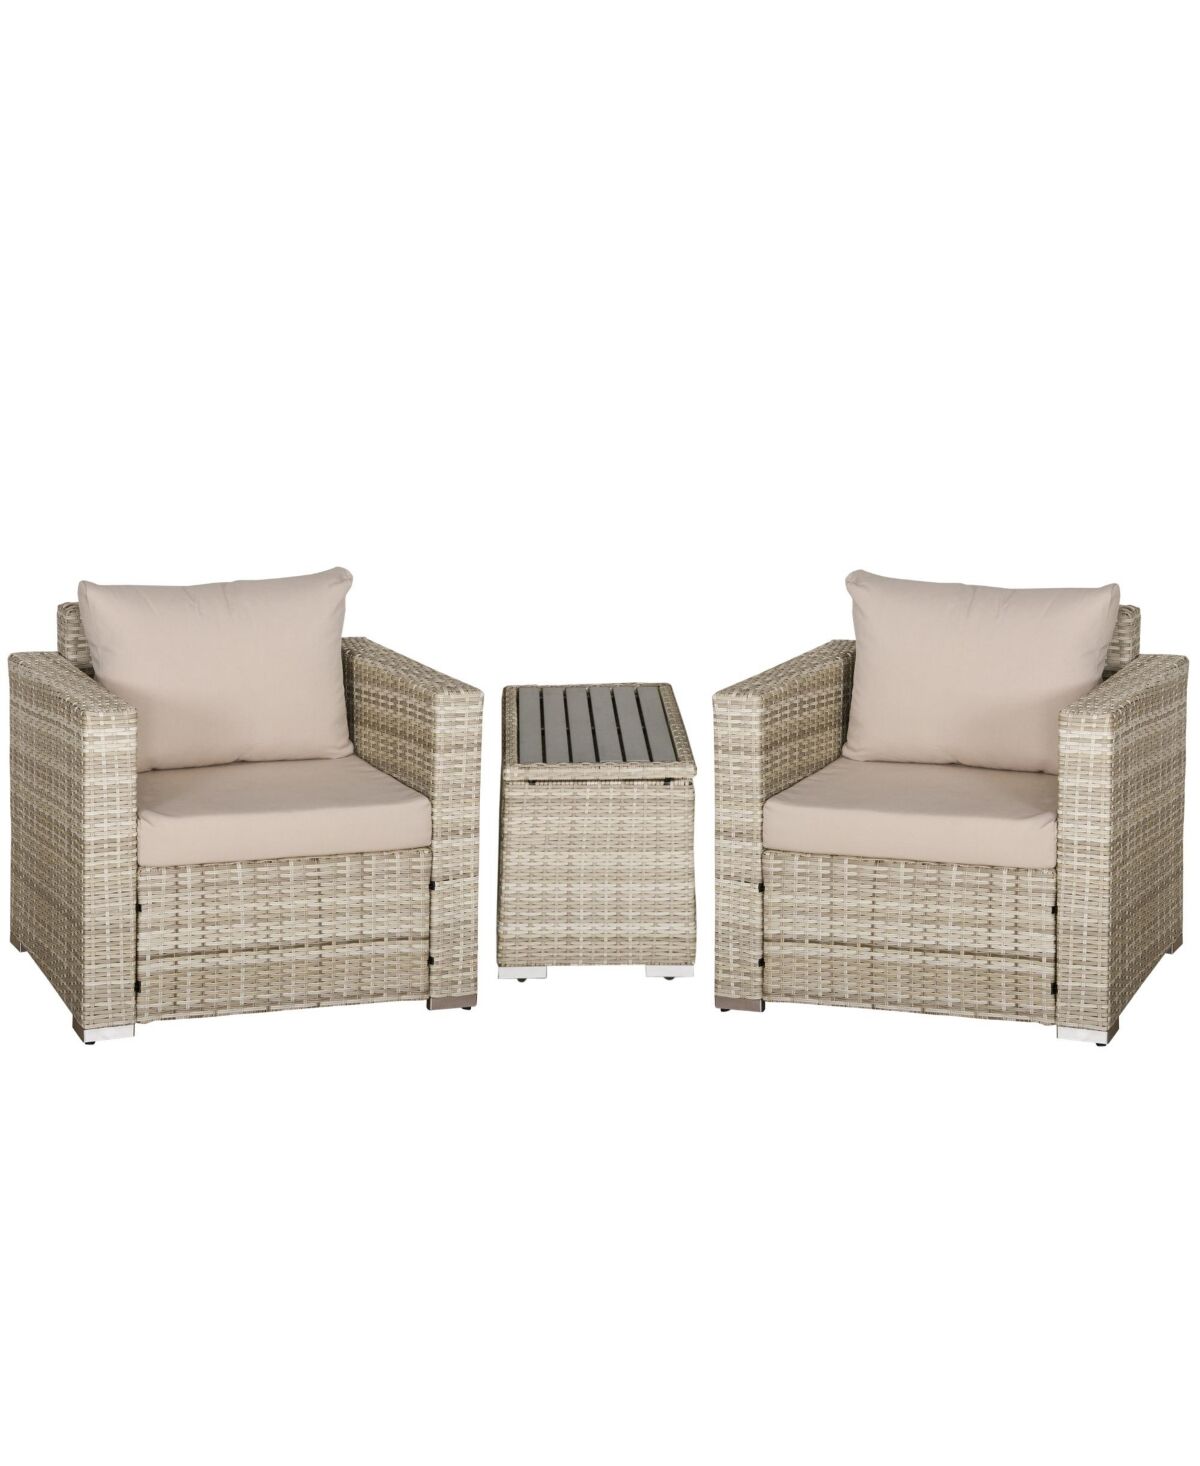 Outsunny 3-Piece Pe Rattan Wicker Sofa Sets Outdoor Armchair Sofa Furniture Set w/ Plastic Wood Grain Side Table and Washable Cushions, Grey - Grey